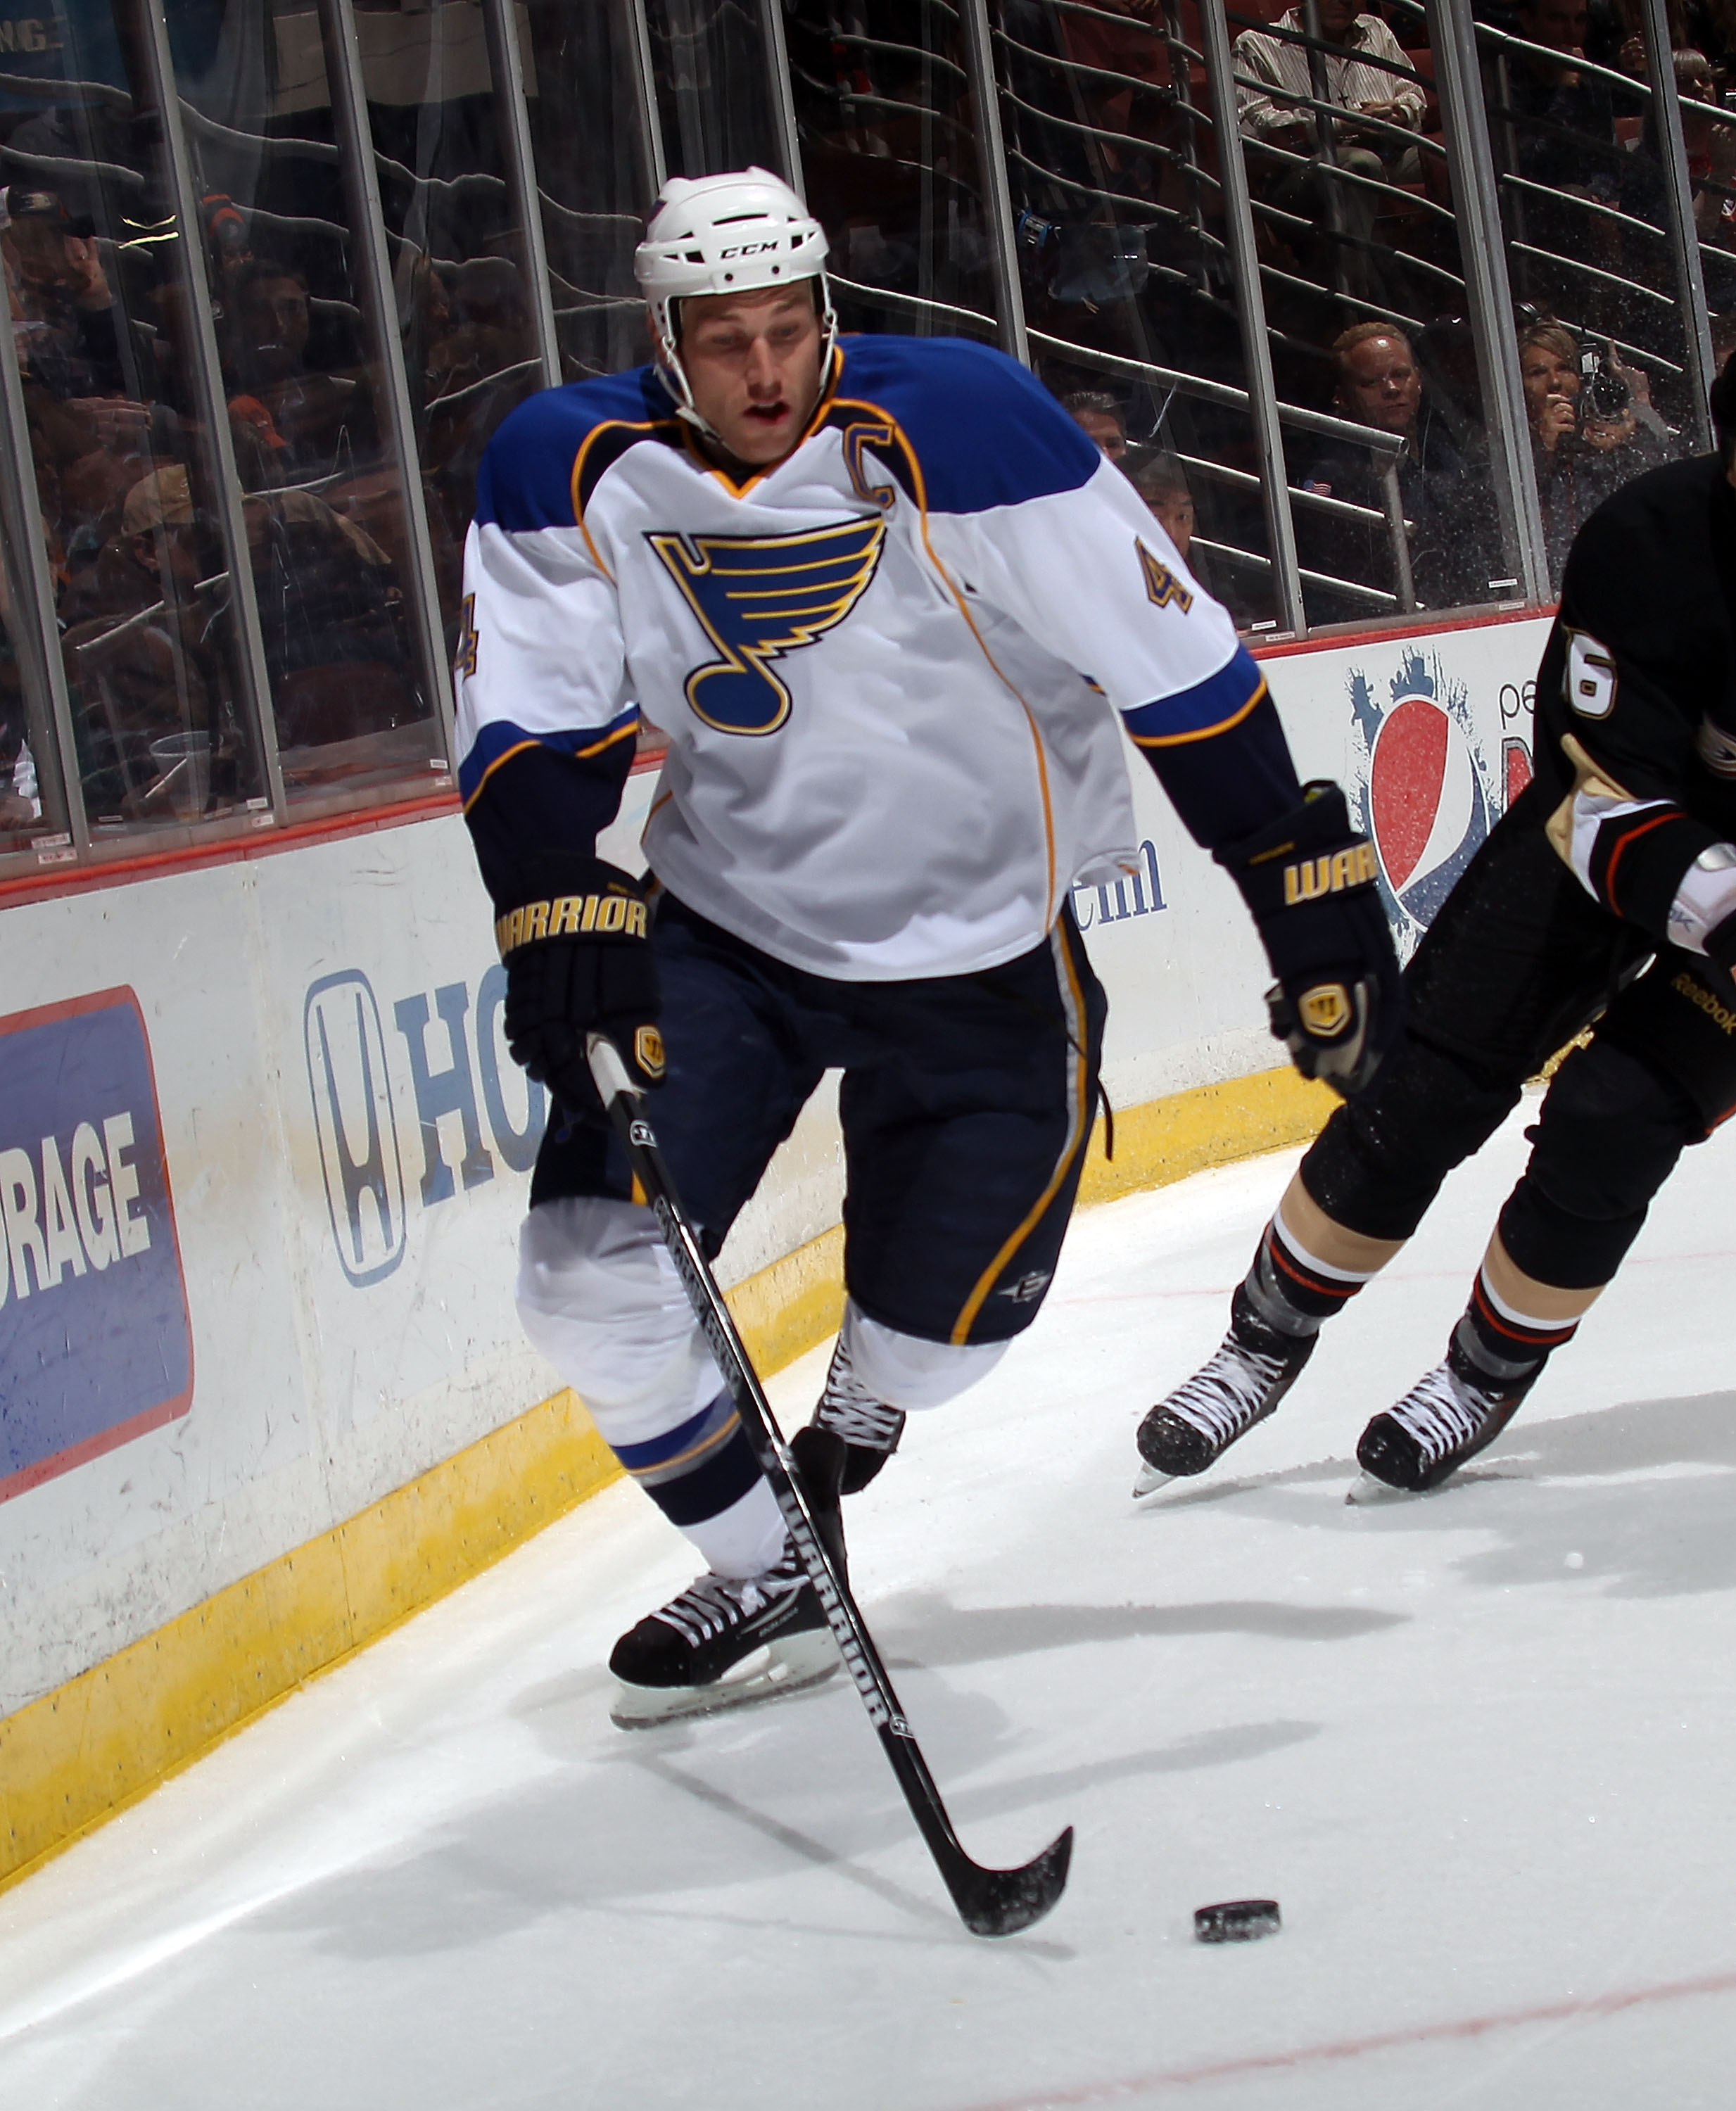 ANAHEIM, CA - JANUARY 12:  Eric Brewer #4 of the St. Louis Blues skates against the Anaheim Ducks at the Honda Center on January 12, 2011 in Anaheim, California.  (Photo by Bruce Bennett/Getty Images)